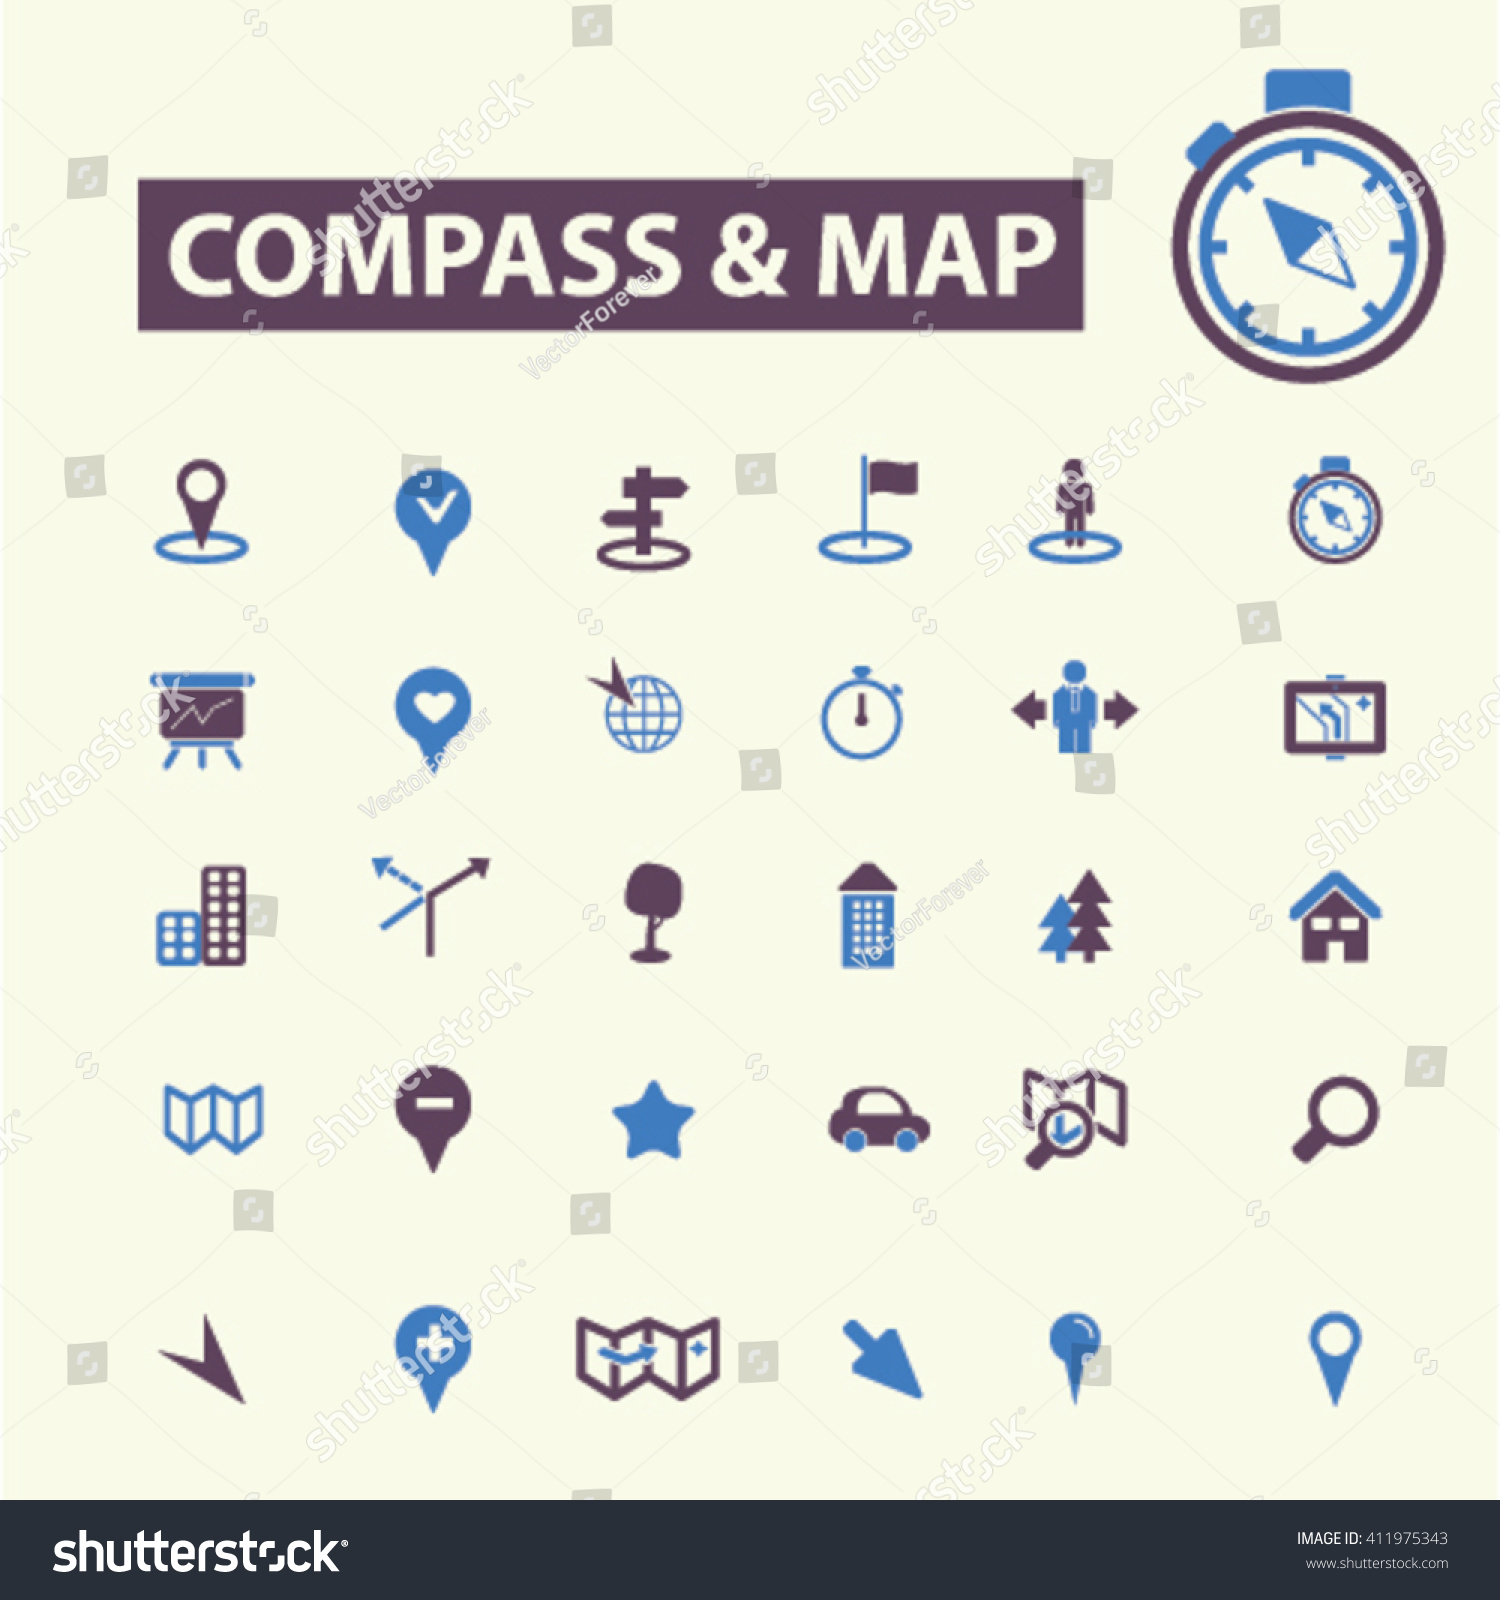 Compass Map Icons Stock Vector 411975343 : Shutterstock